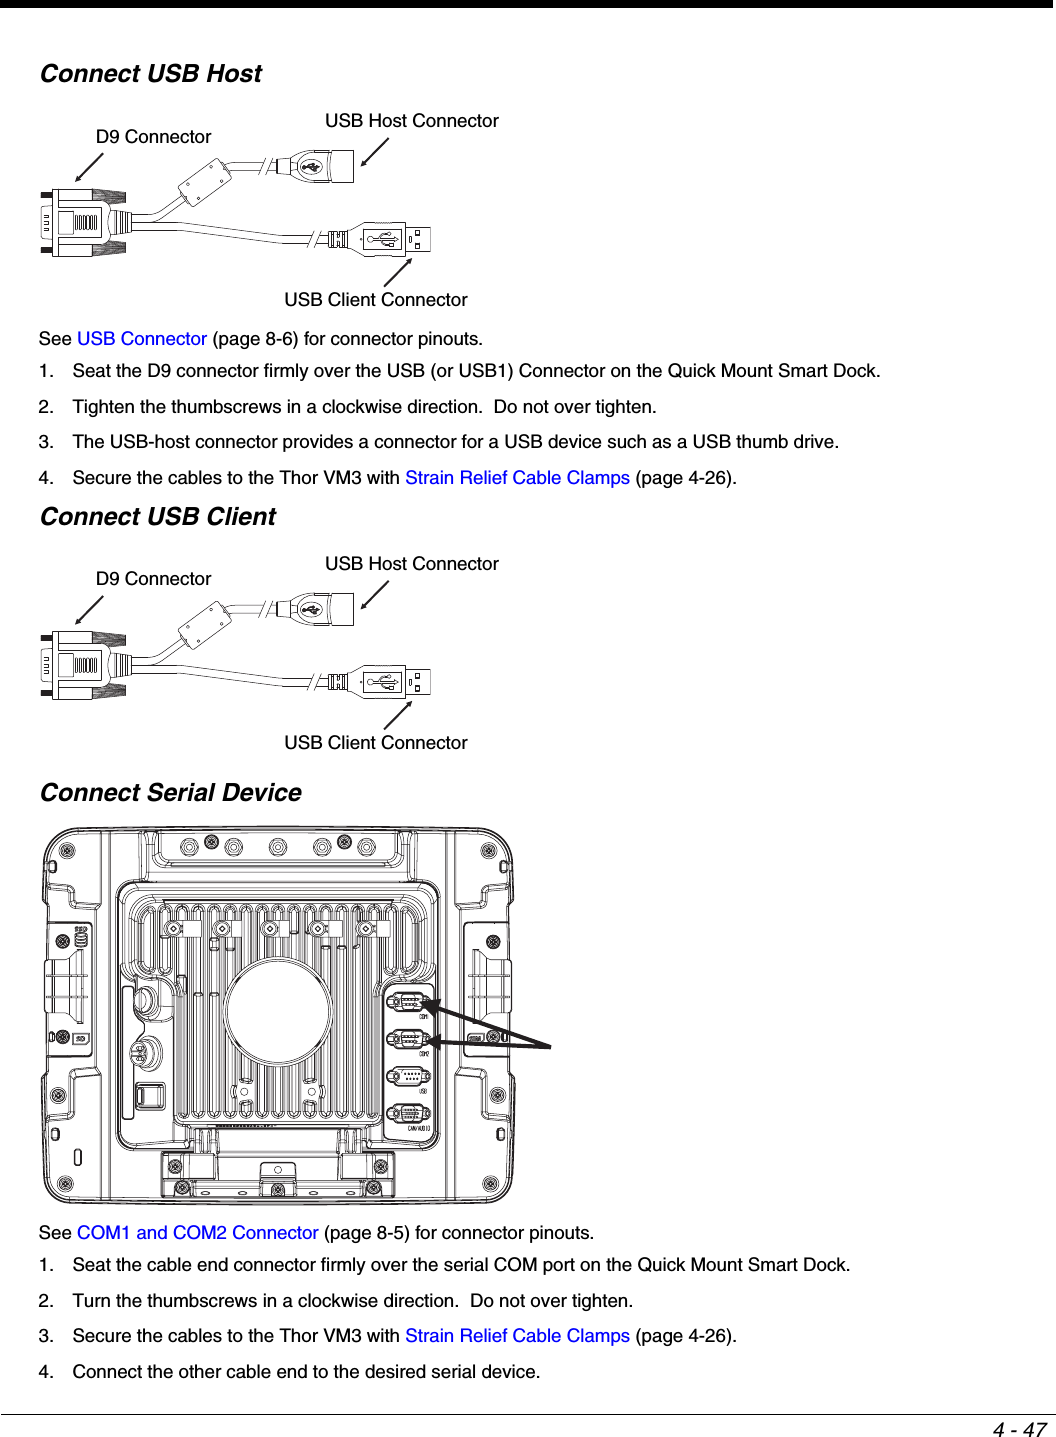 4 - 47Connect USB HostSee USB Connector (page 8-6) for connector pinouts.1. Seat the D9 connector firmly over the USB (or USB1) Connector on the Quick Mount Smart Dock.2. Tighten the thumbscrews in a clockwise direction.  Do not over tighten.3. The USB-host connector provides a connector for a USB device such as a USB thumb drive.4. Secure the cables to the Thor VM3 with Strain Relief Cable Clamps (page 4-26).Connect USB ClientConnect Serial DeviceSee COM1 and COM2 Connector (page 8-5) for connector pinouts.1. Seat the cable end connector firmly over the serial COM port on the Quick Mount Smart Dock. 2. Turn the thumbscrews in a clockwise direction.  Do not over tighten.3. Secure the cables to the Thor VM3 with Strain Relief Cable Clamps (page 4-26).4. Connect the other cable end to the desired serial device.D9 Connector USB Host ConnectorUSB Client ConnectorD9 Connector USB Host ConnectorUSB Client Connector